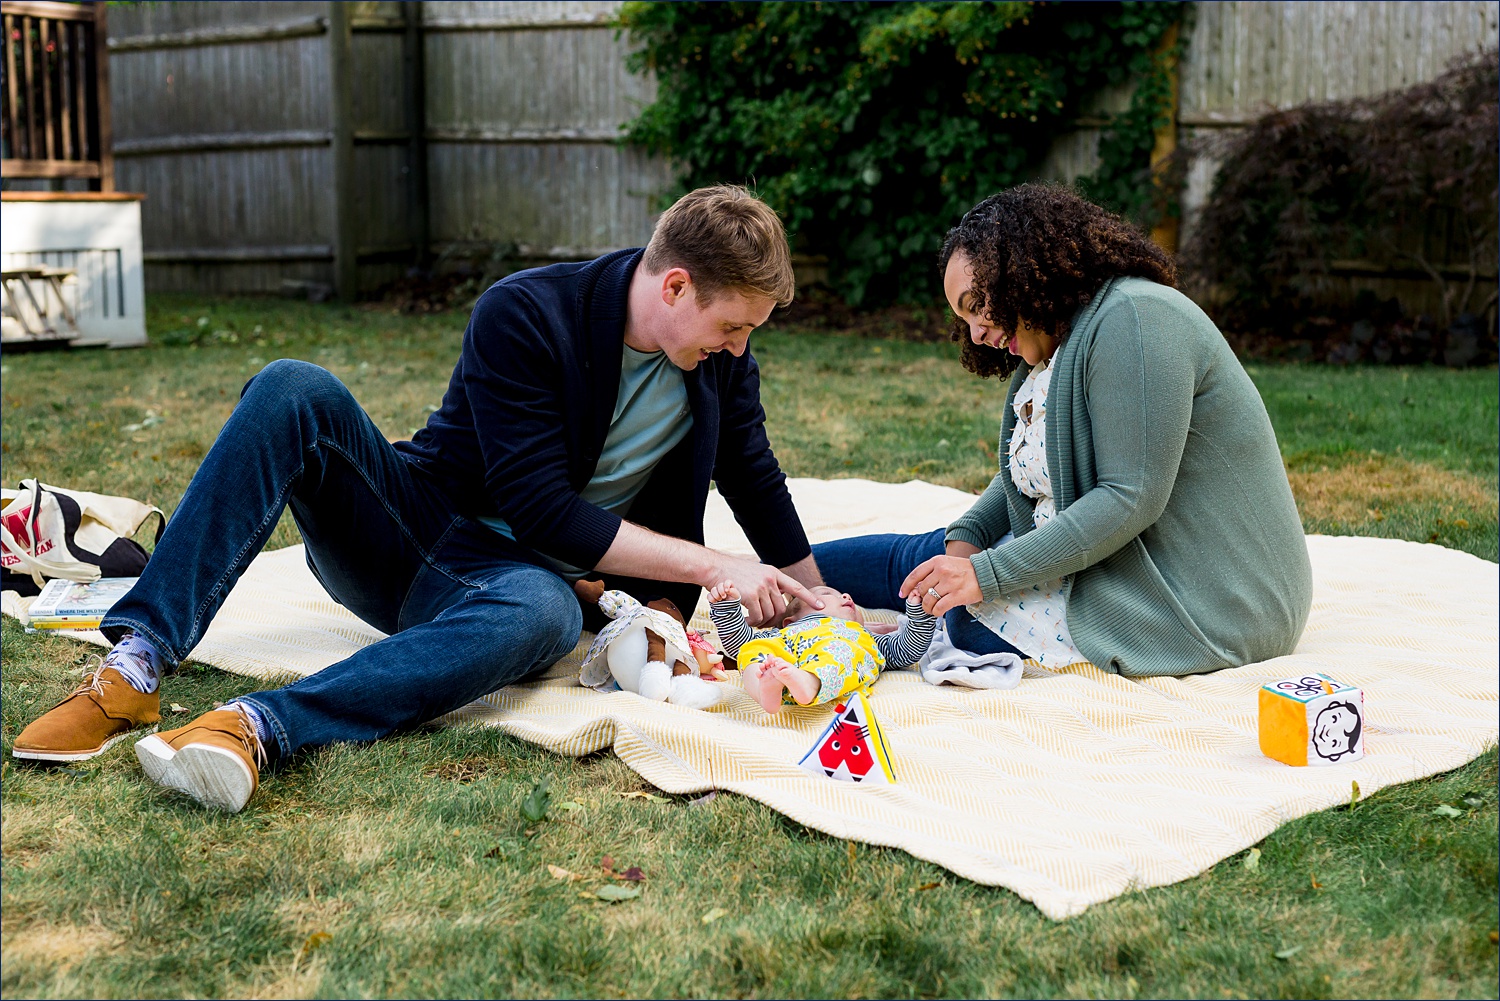 The family plays on a blanket in the backyard